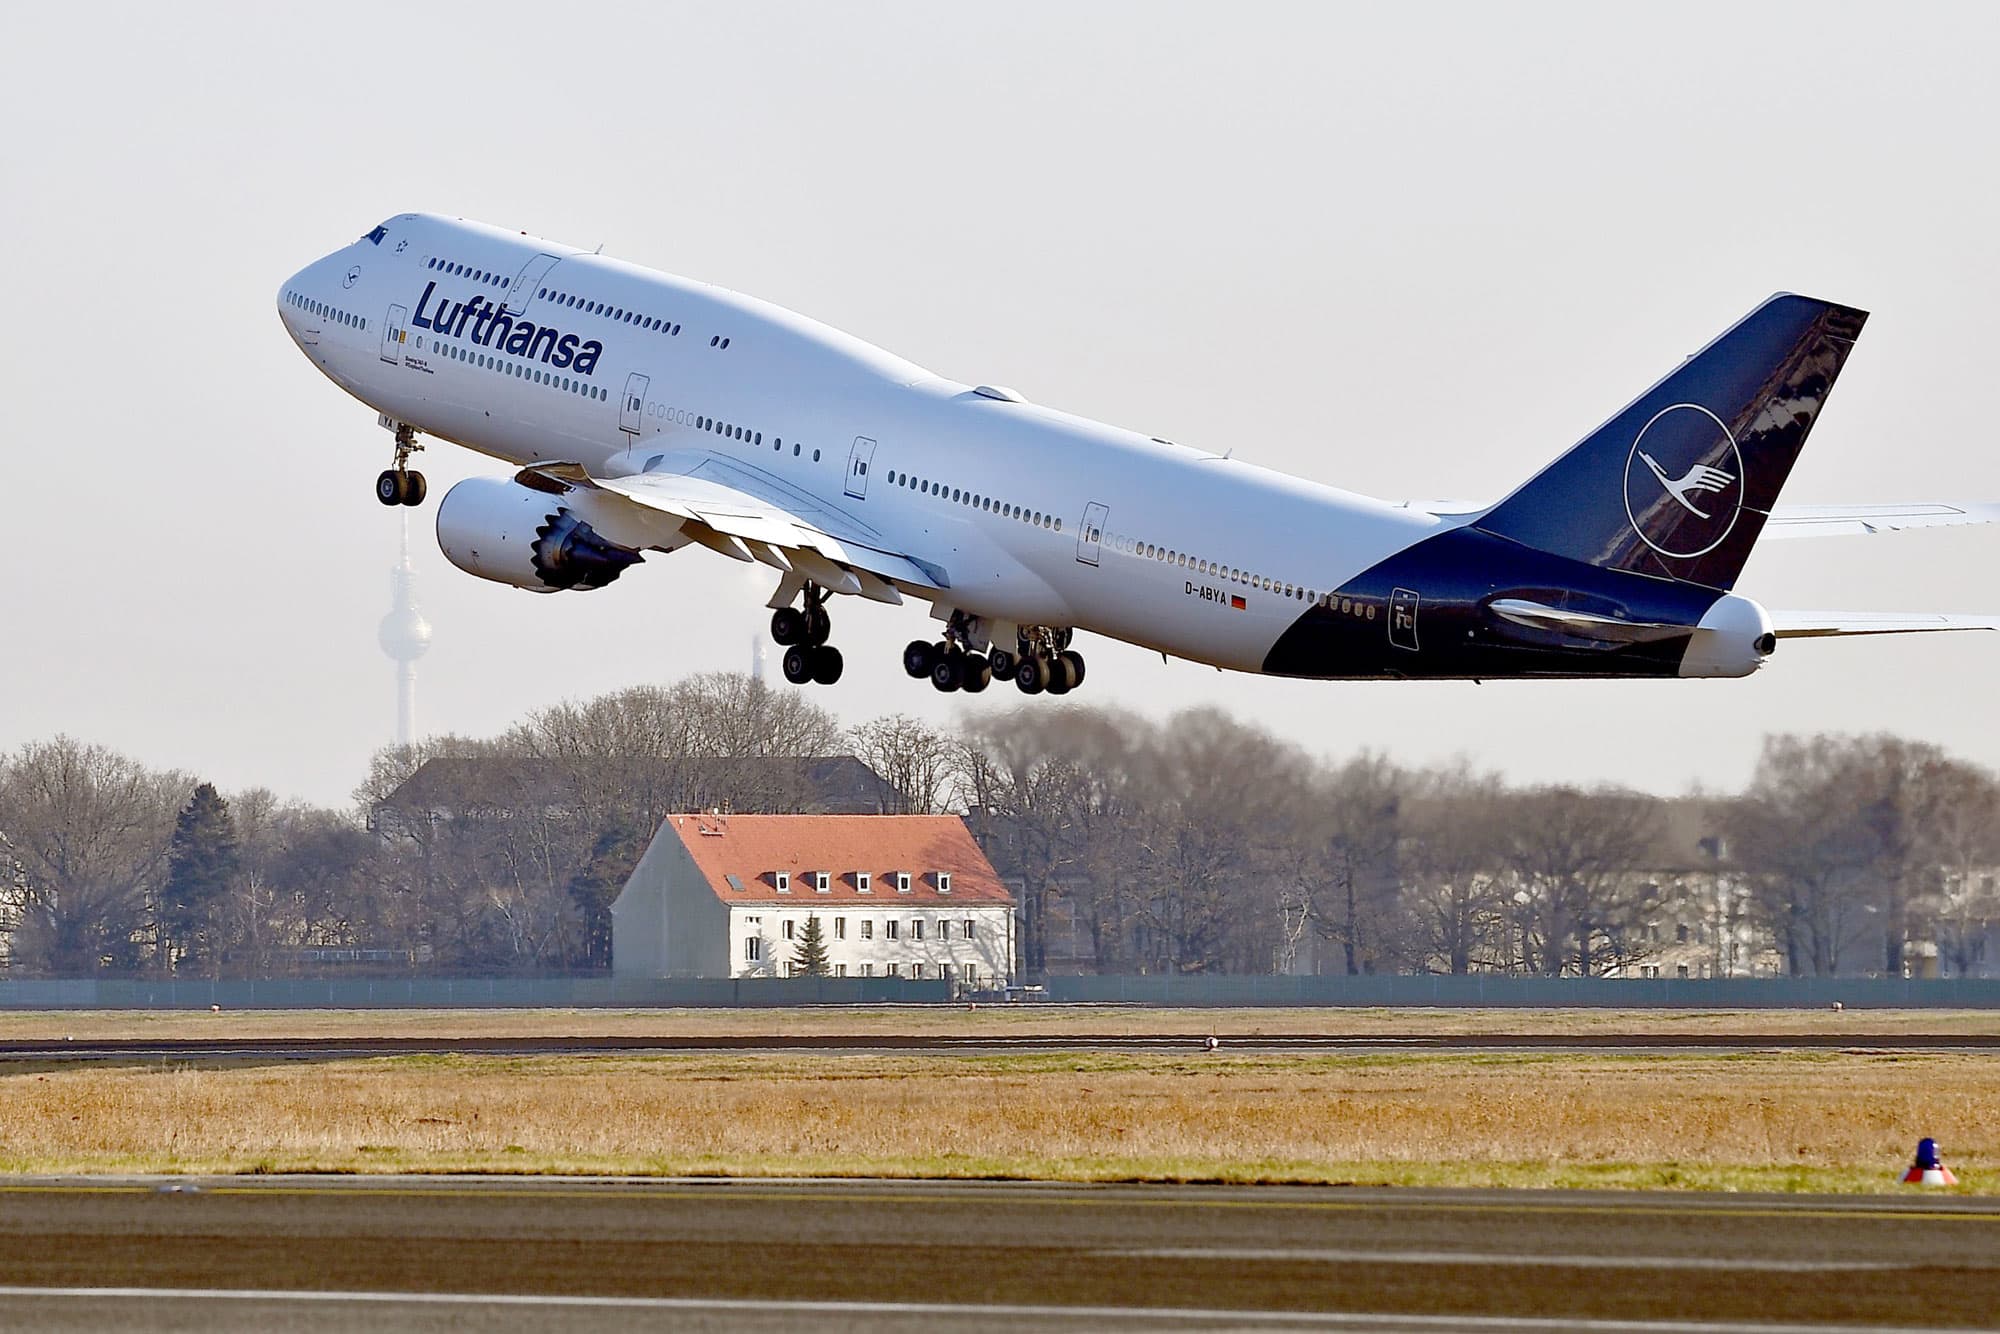 European carriers are flying near-empty planes this winter to keep airport slots